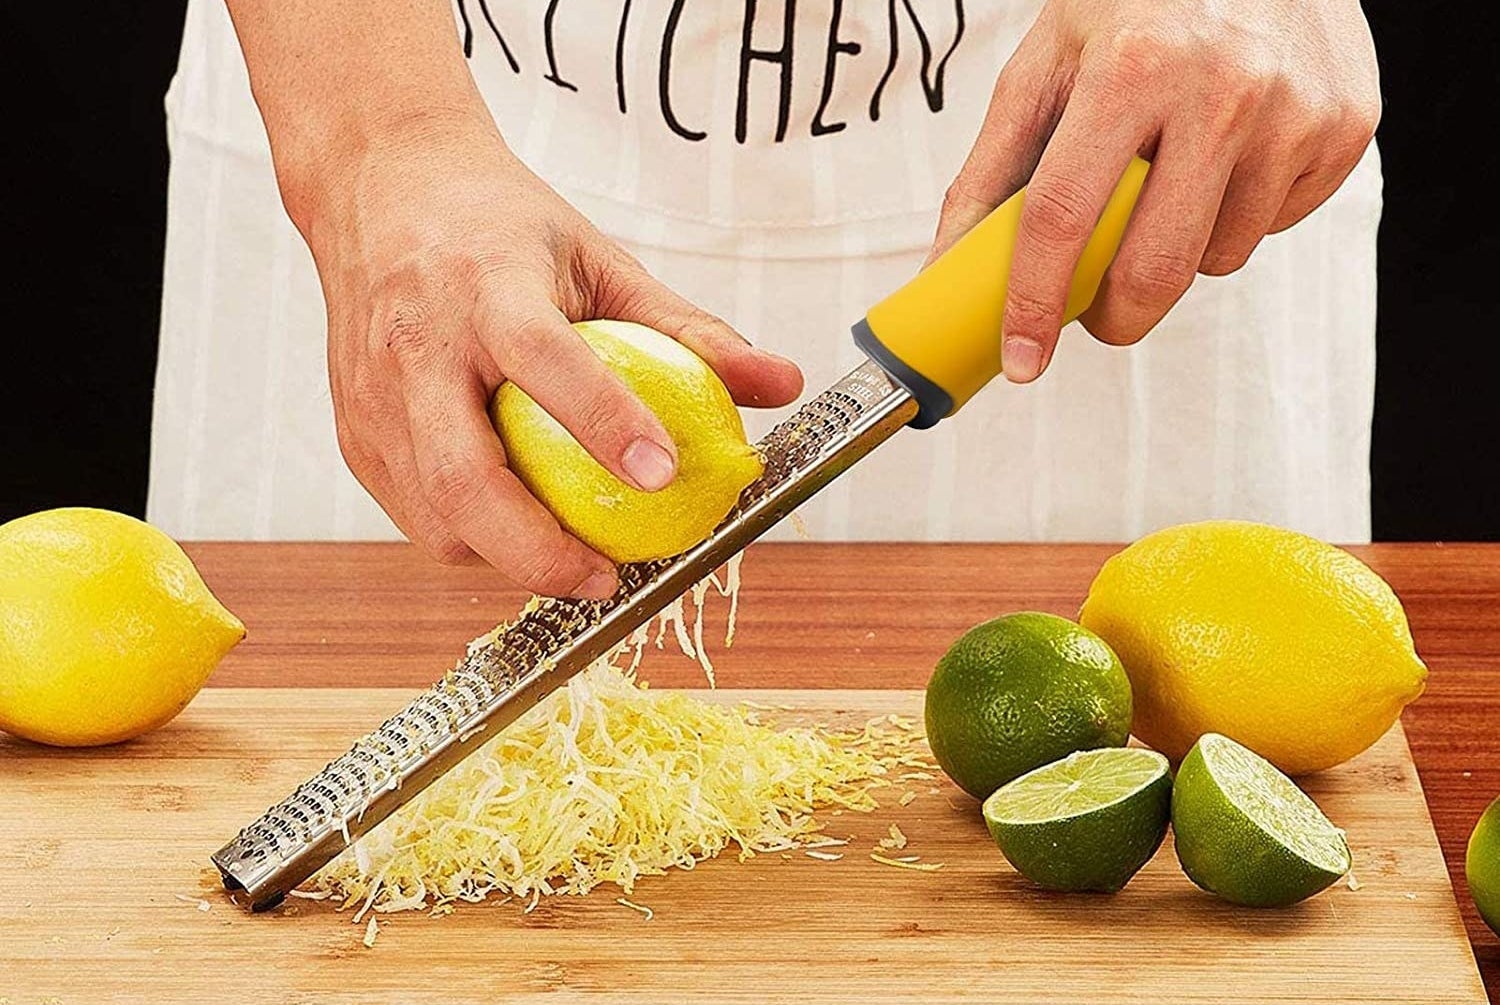 person zesting a lemon with the utensil